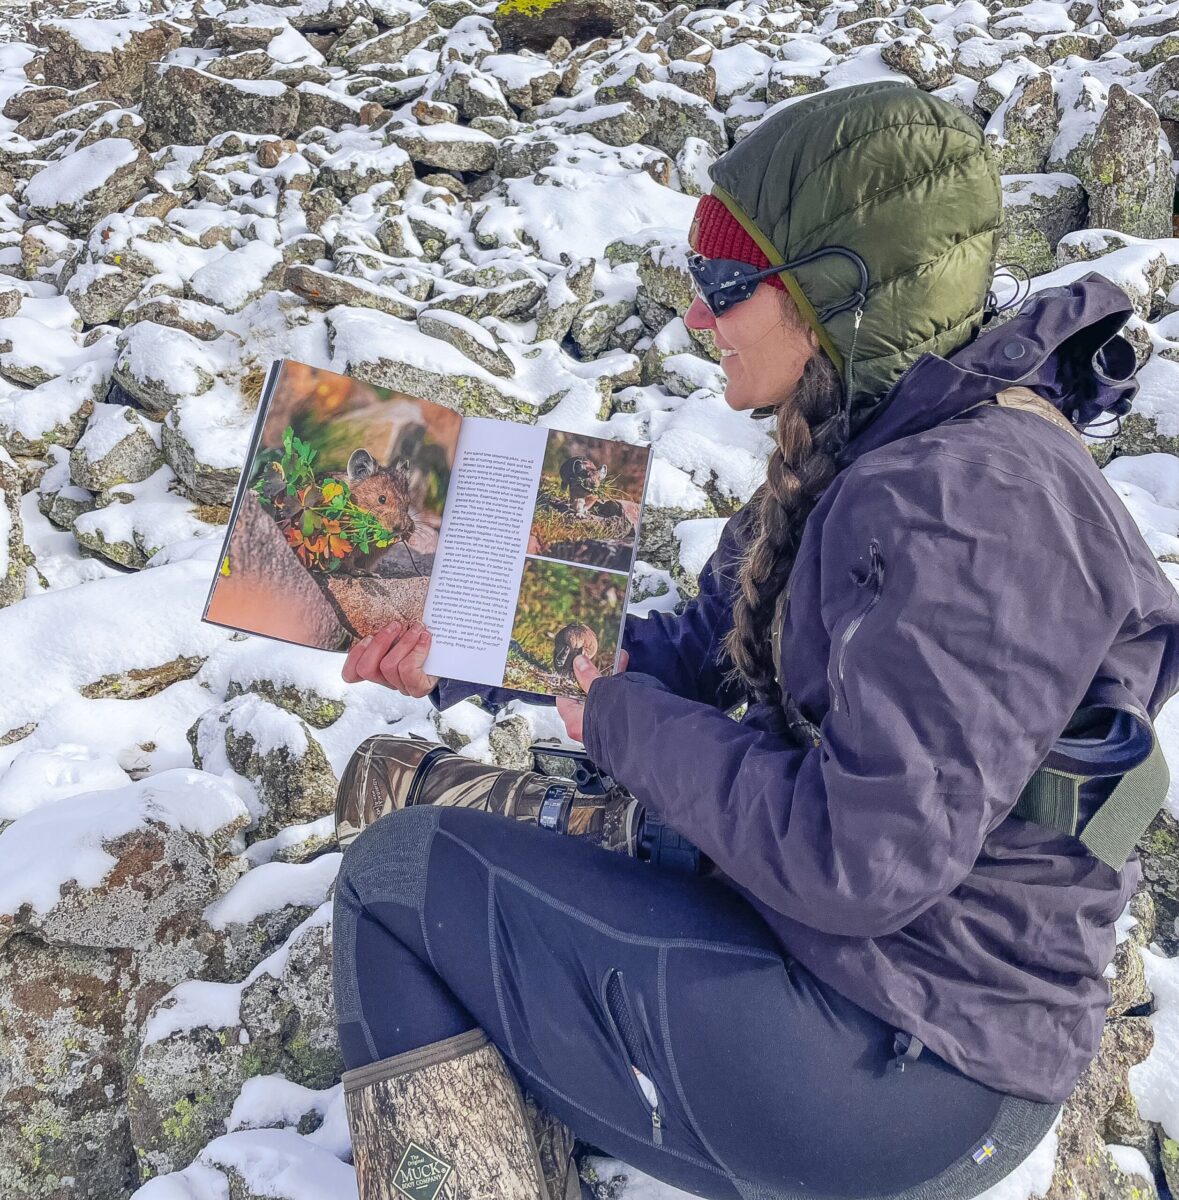 A woman reads a book about pikas in a talus field